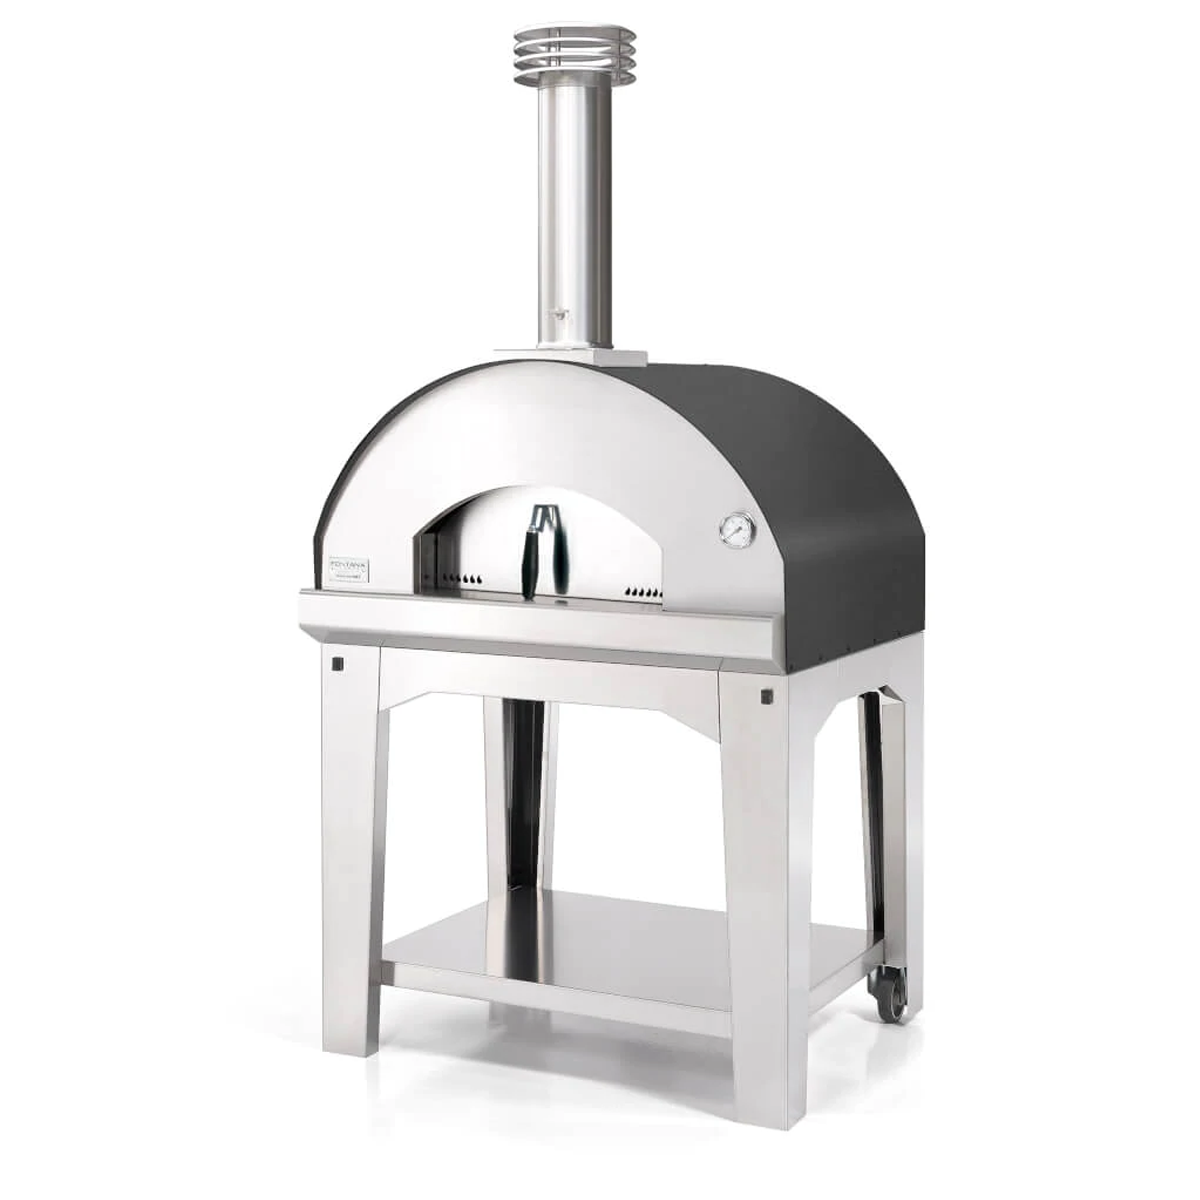 The Mangiafuoco Wood Pizza Oven